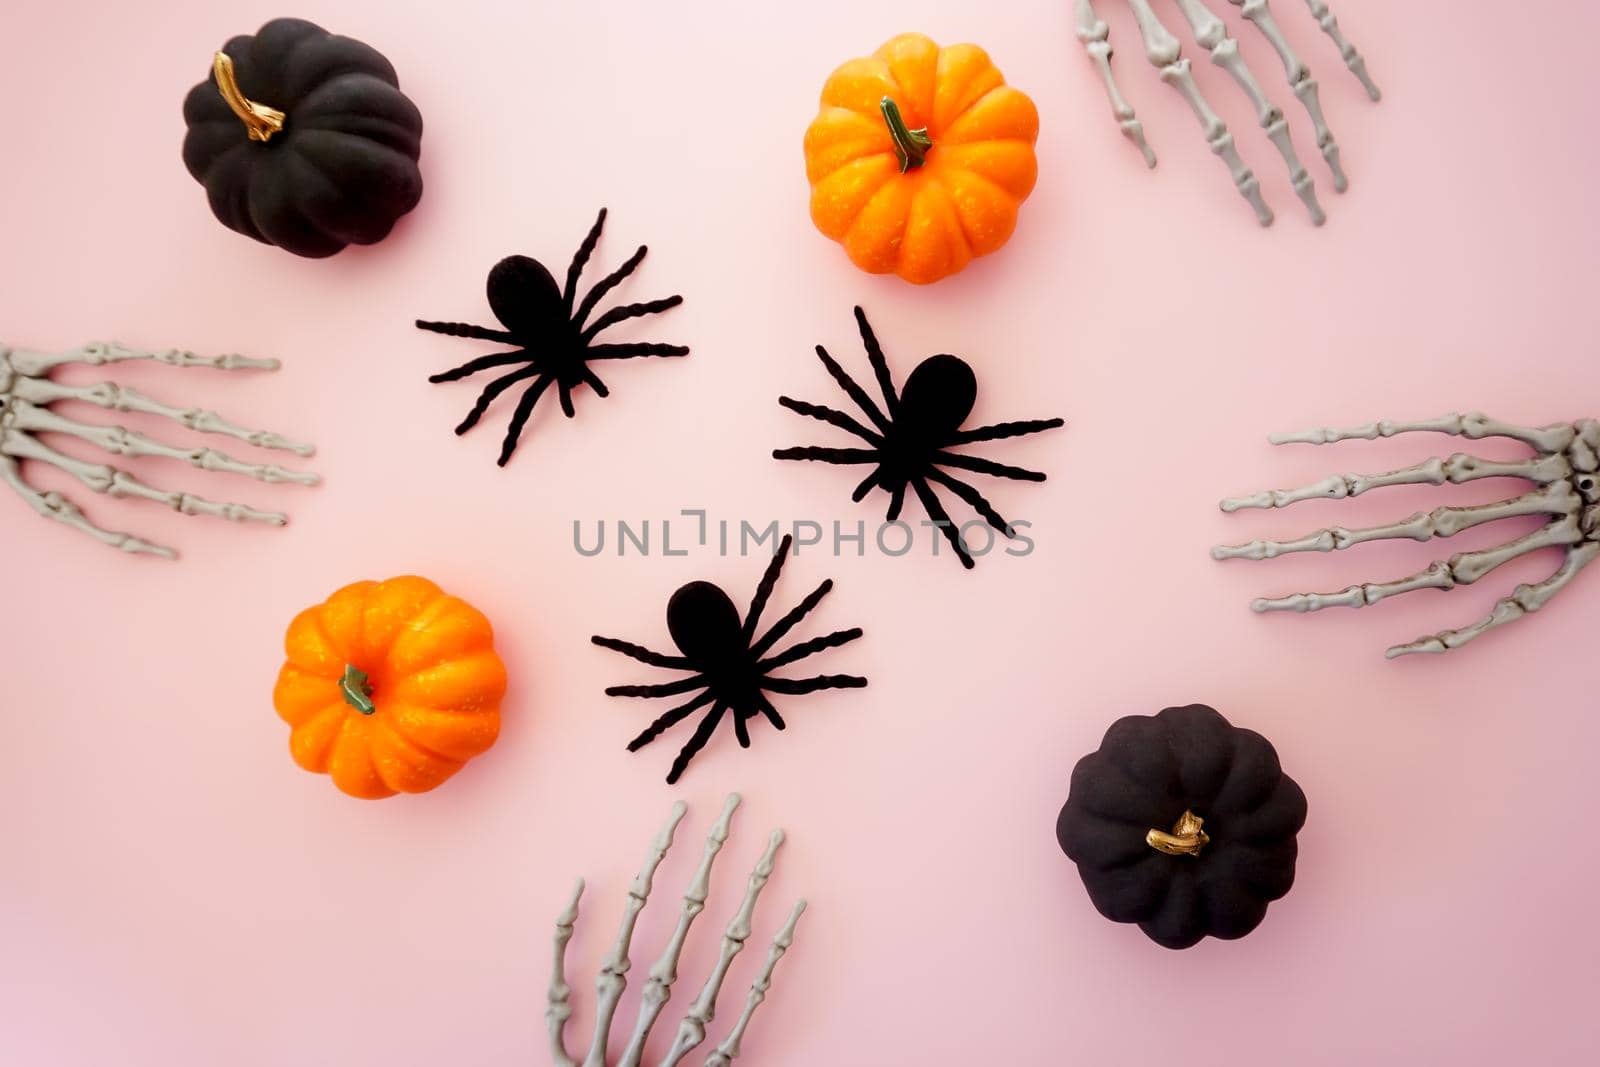 Halloween greeting card on pink background. On a pink background there are skeletal bones, colorful pumpkins and black furry spiders.